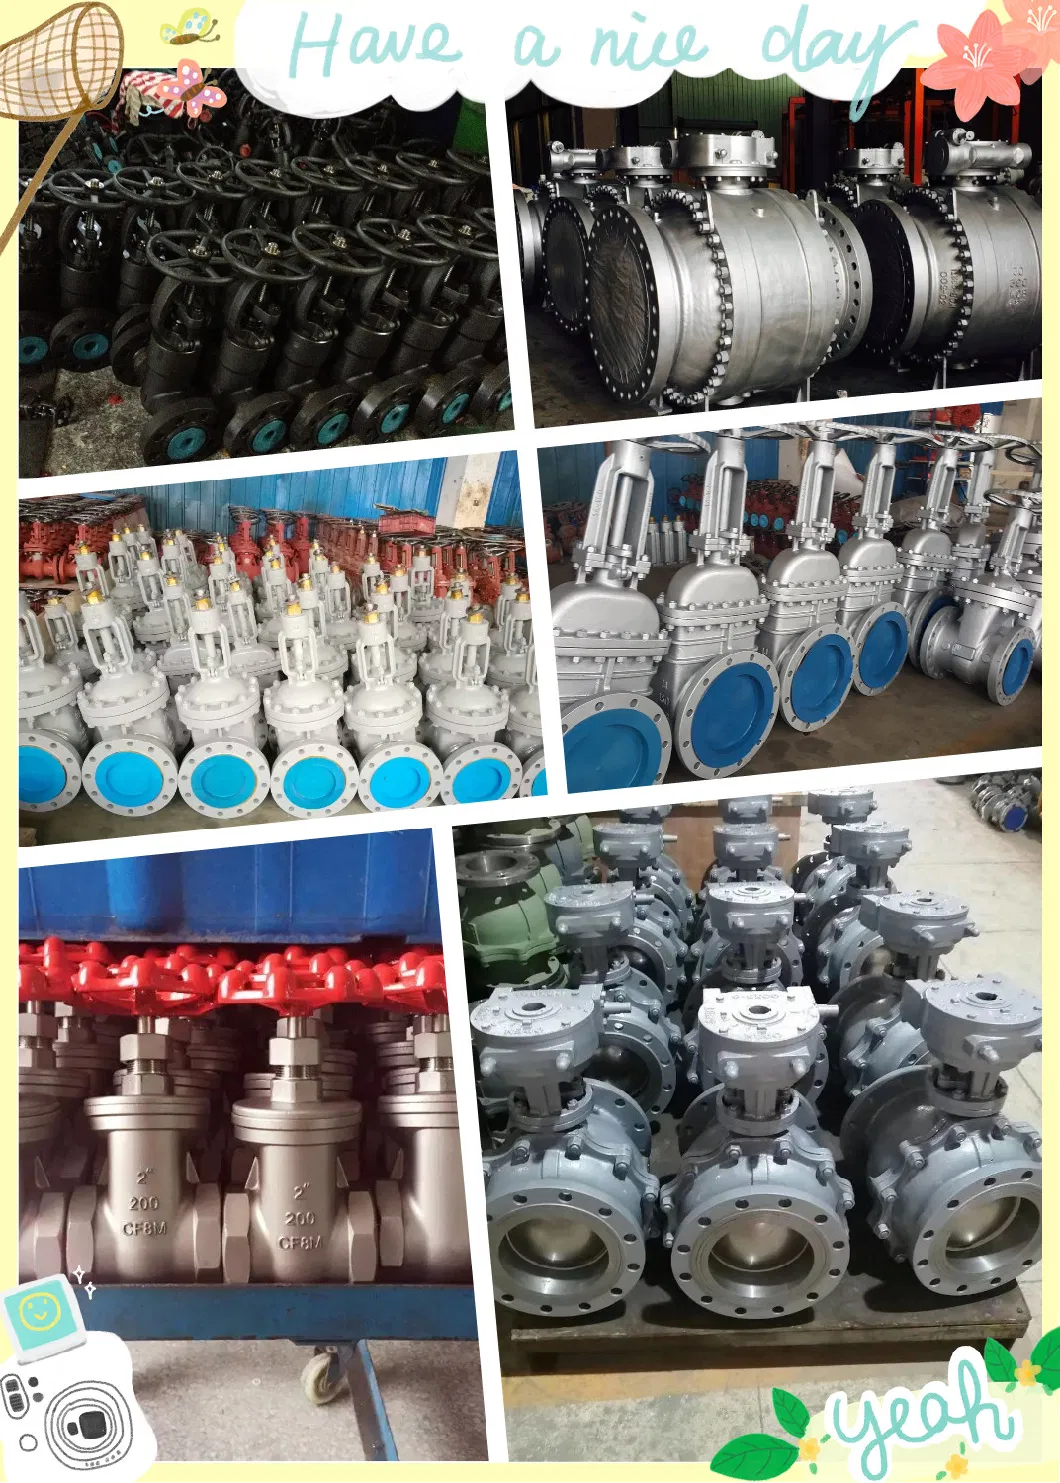 API 6D/DIN/GB Fire Safety Nace Mr 0175 Full Port/Reduce Port Oil Gas Wcb/CF8/CF8m Worm Gear Operated Flange Trunnion Mounted Pneumatic/Electric Ball Valves